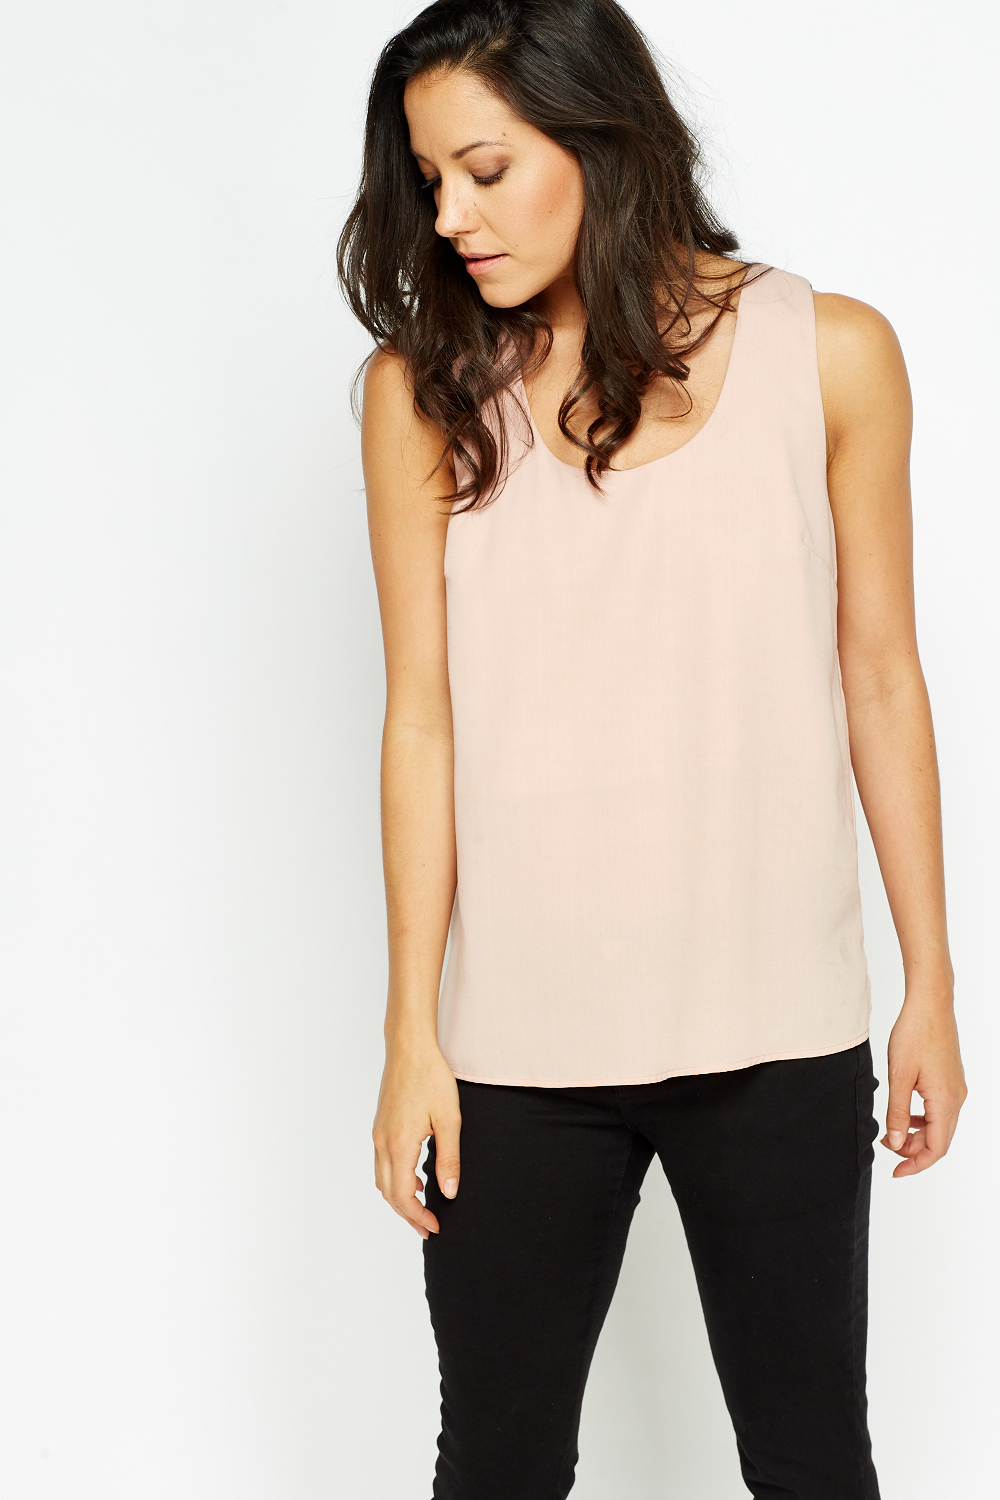 Entrusted Cut Out Back Top - Just $7